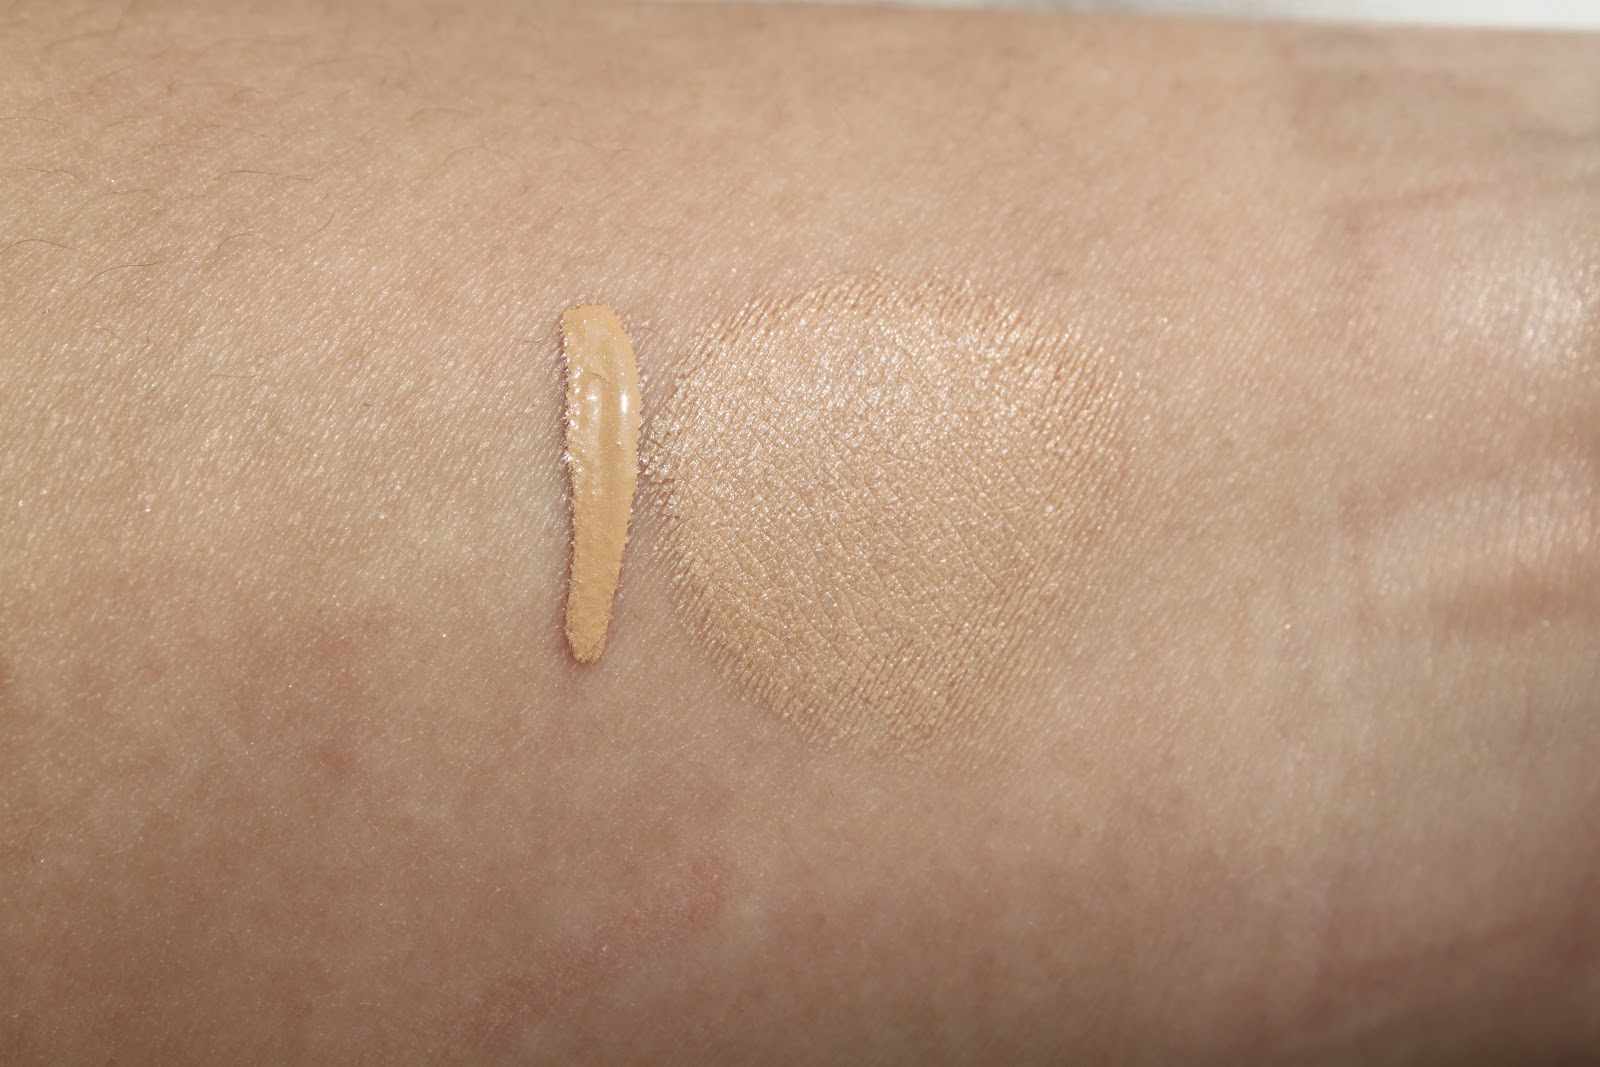 high precision retouch concealer